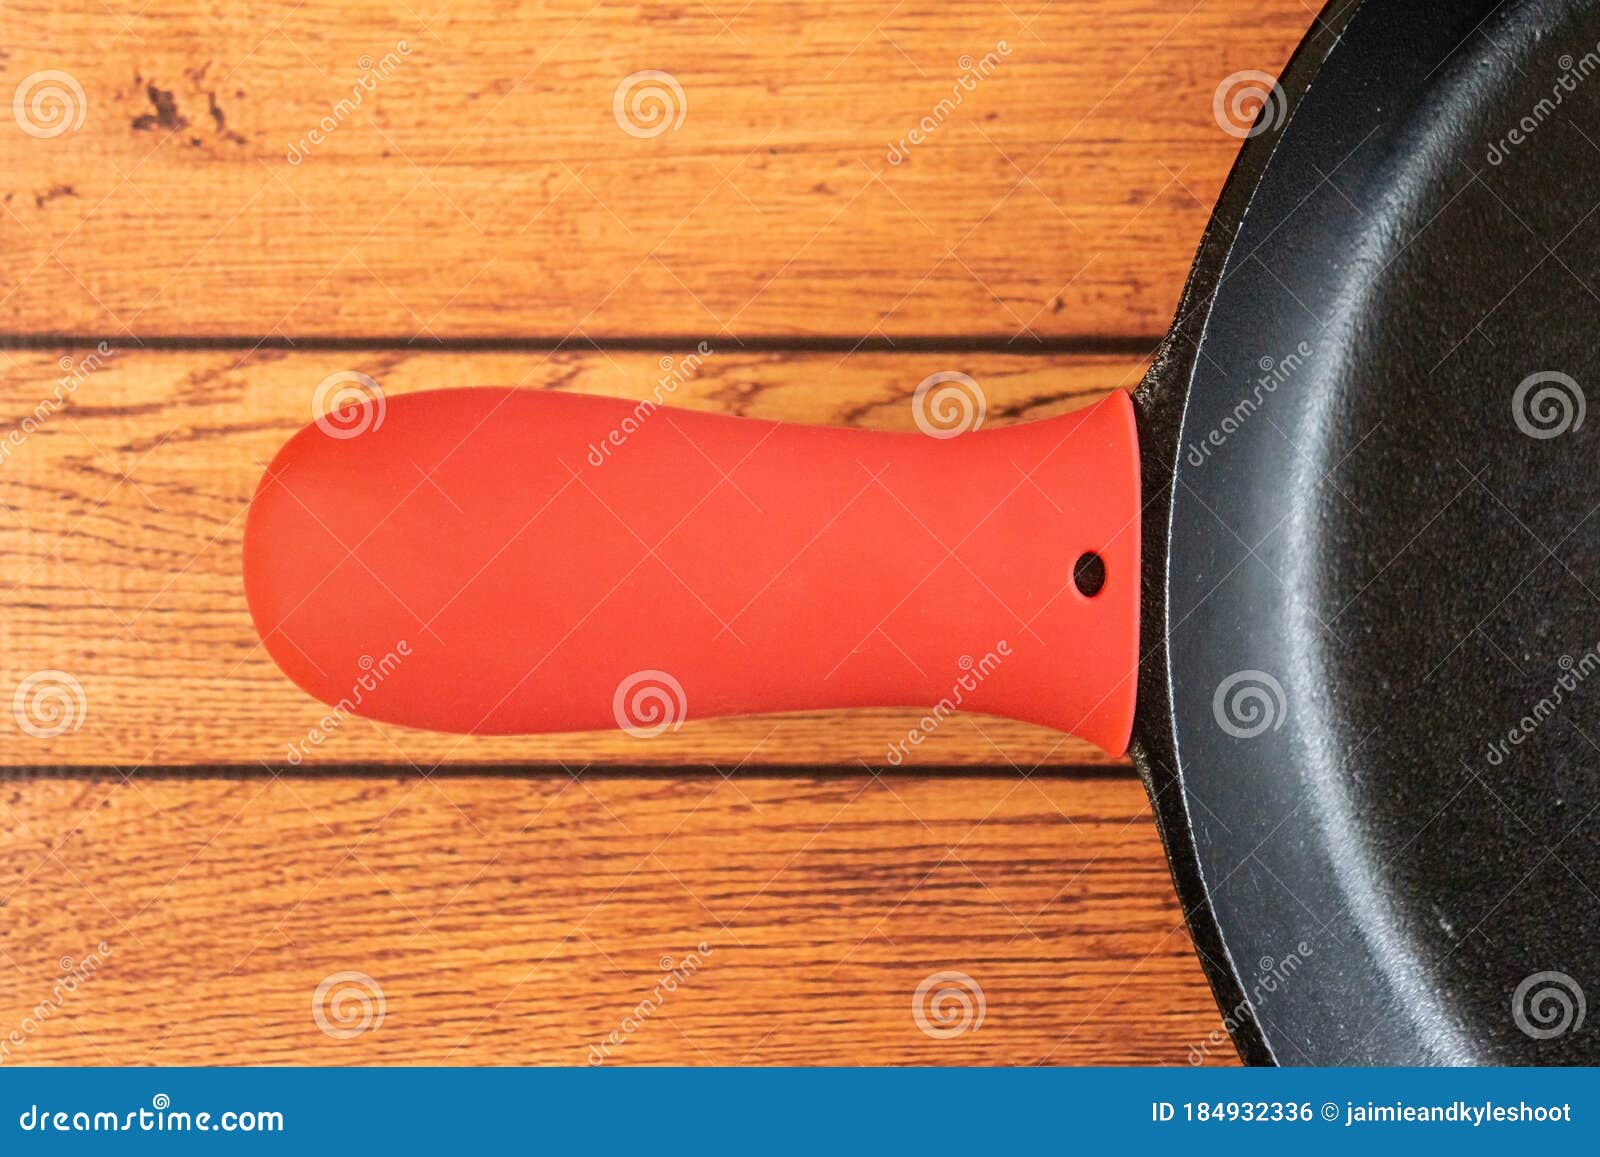 https://thumbs.dreamstime.com/z/silicone-hot-skillet-handle-cover-holder-insulating-kitchen-accessory-protects-hands-pan-handles-heat-resistant-creates-layer-184932336.jpg